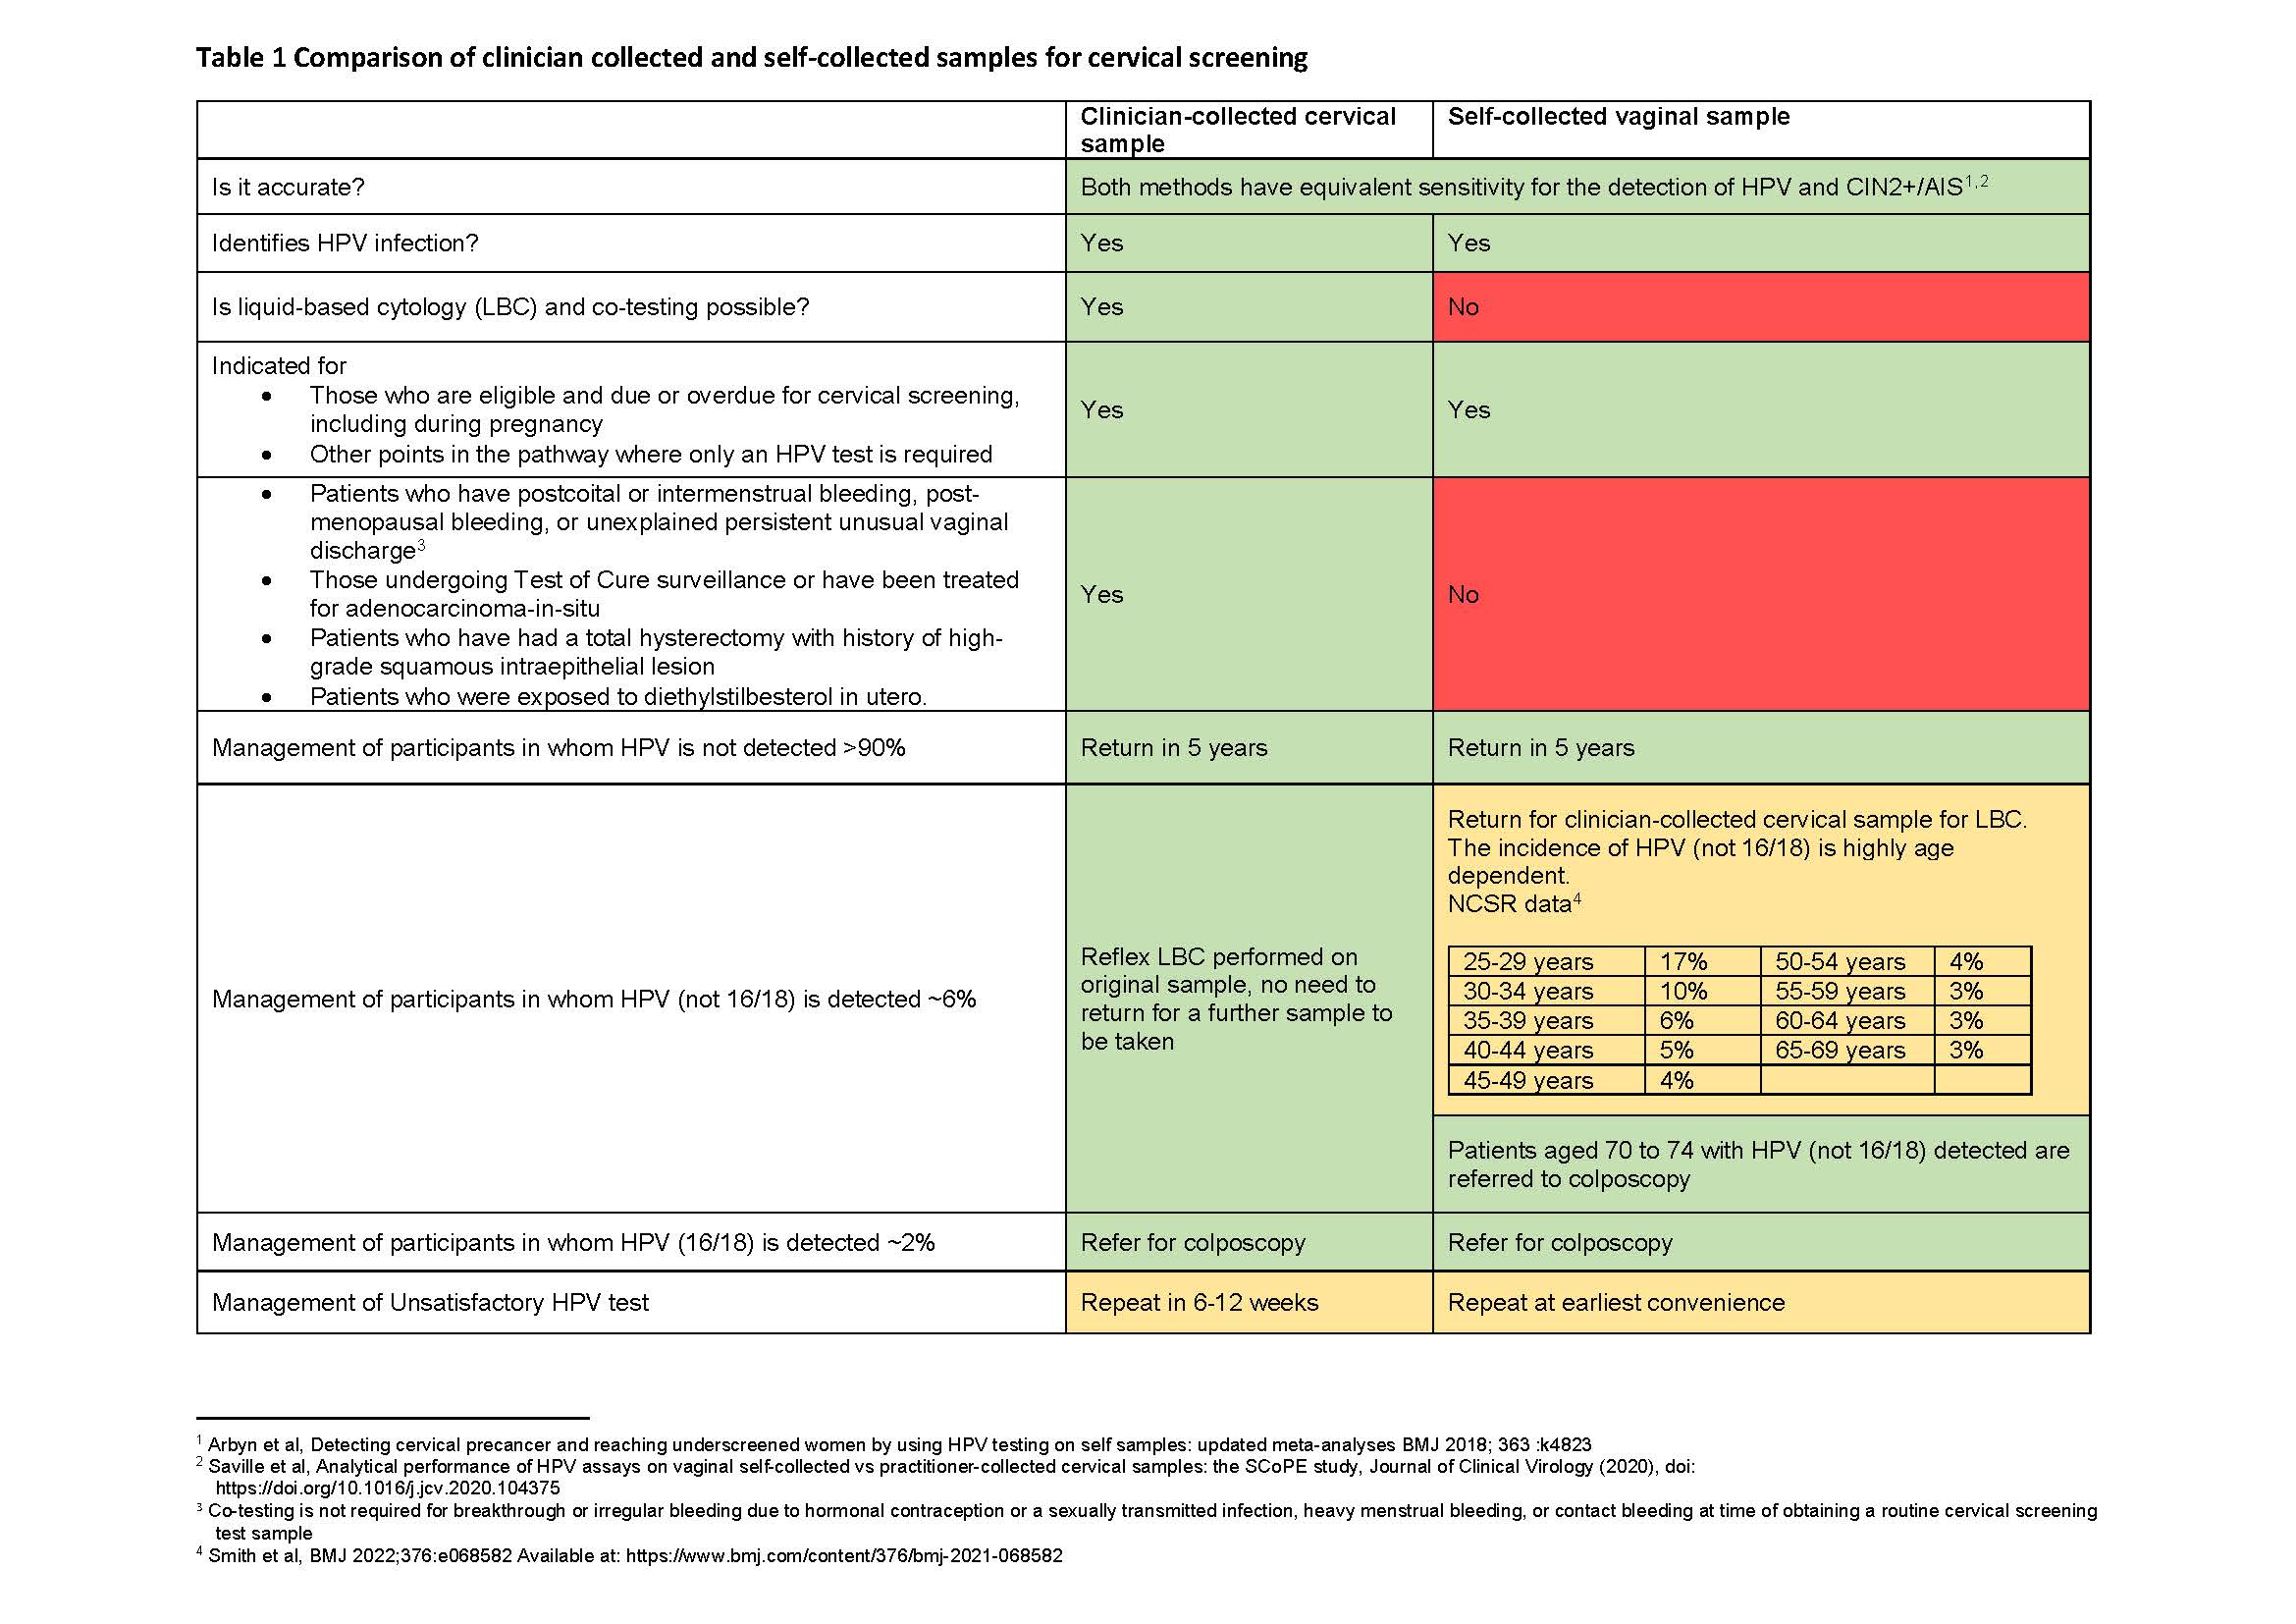 Table 1. Comparison of clinician collected and self-collected samples for cervical screening